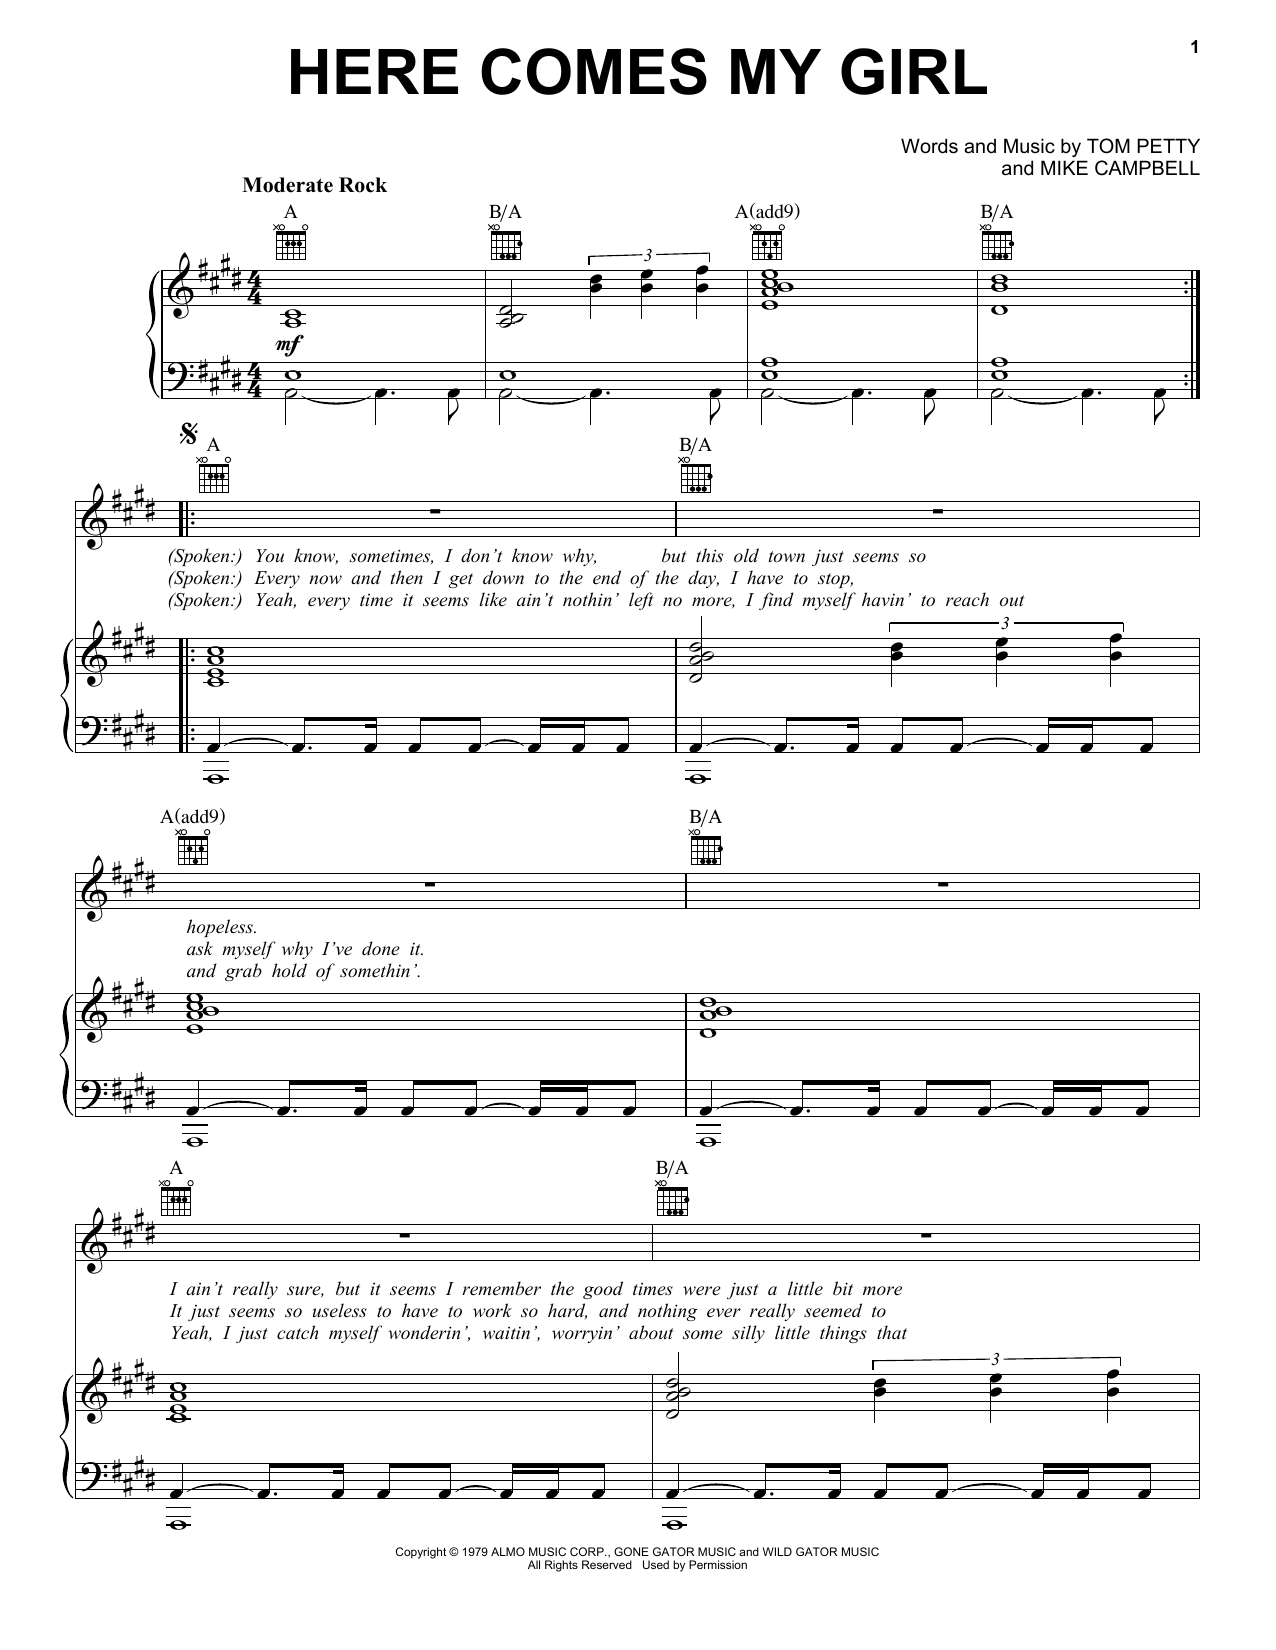 Tom Petty And The Heartbreakers Here Comes My Girl sheet music notes and chords. Download Printable PDF.